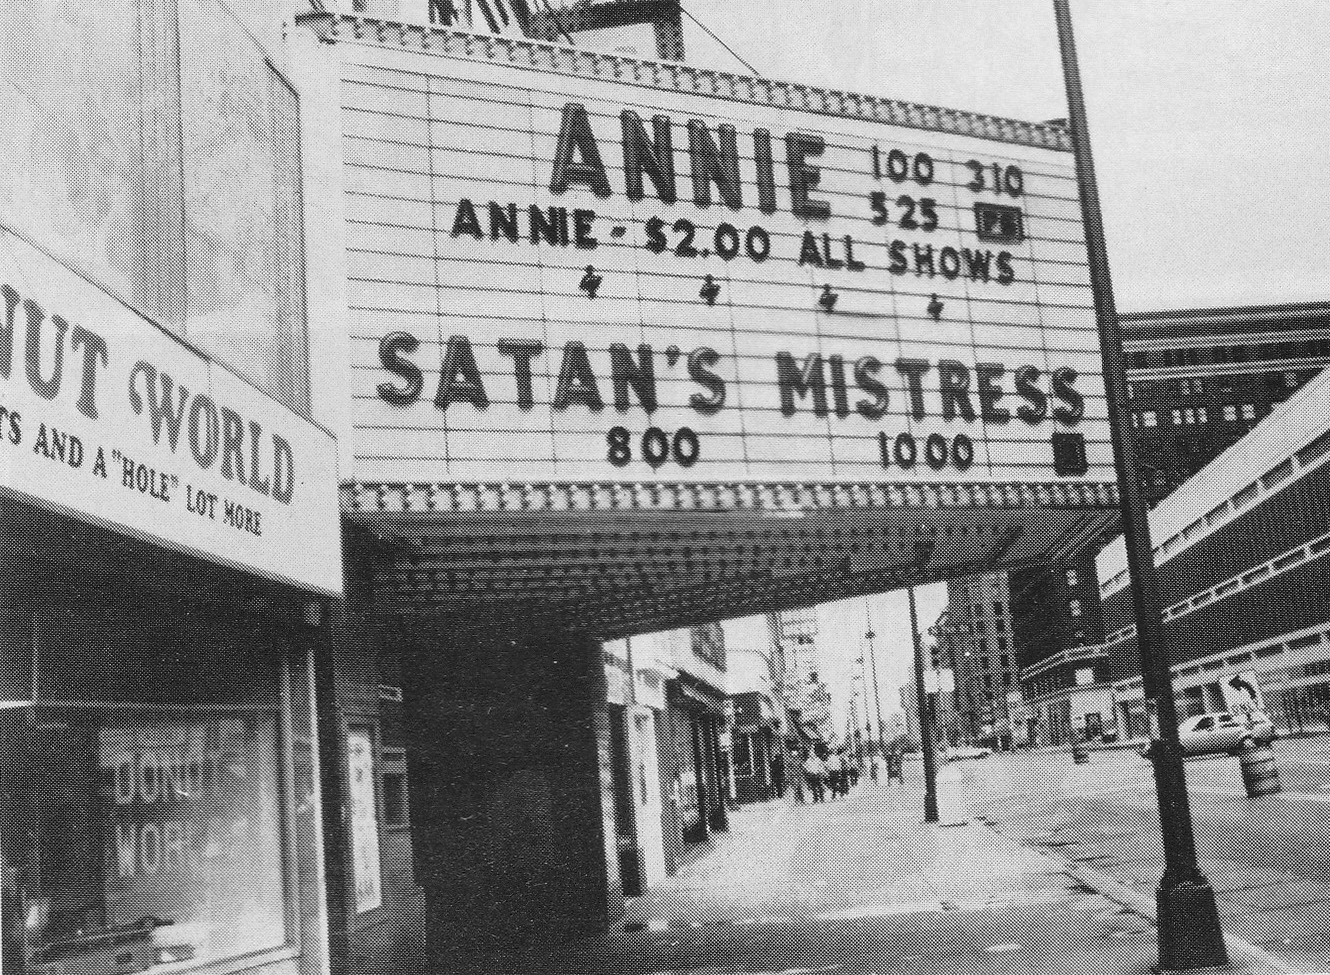 Movie Theater Marquees from the 1950s-1970s